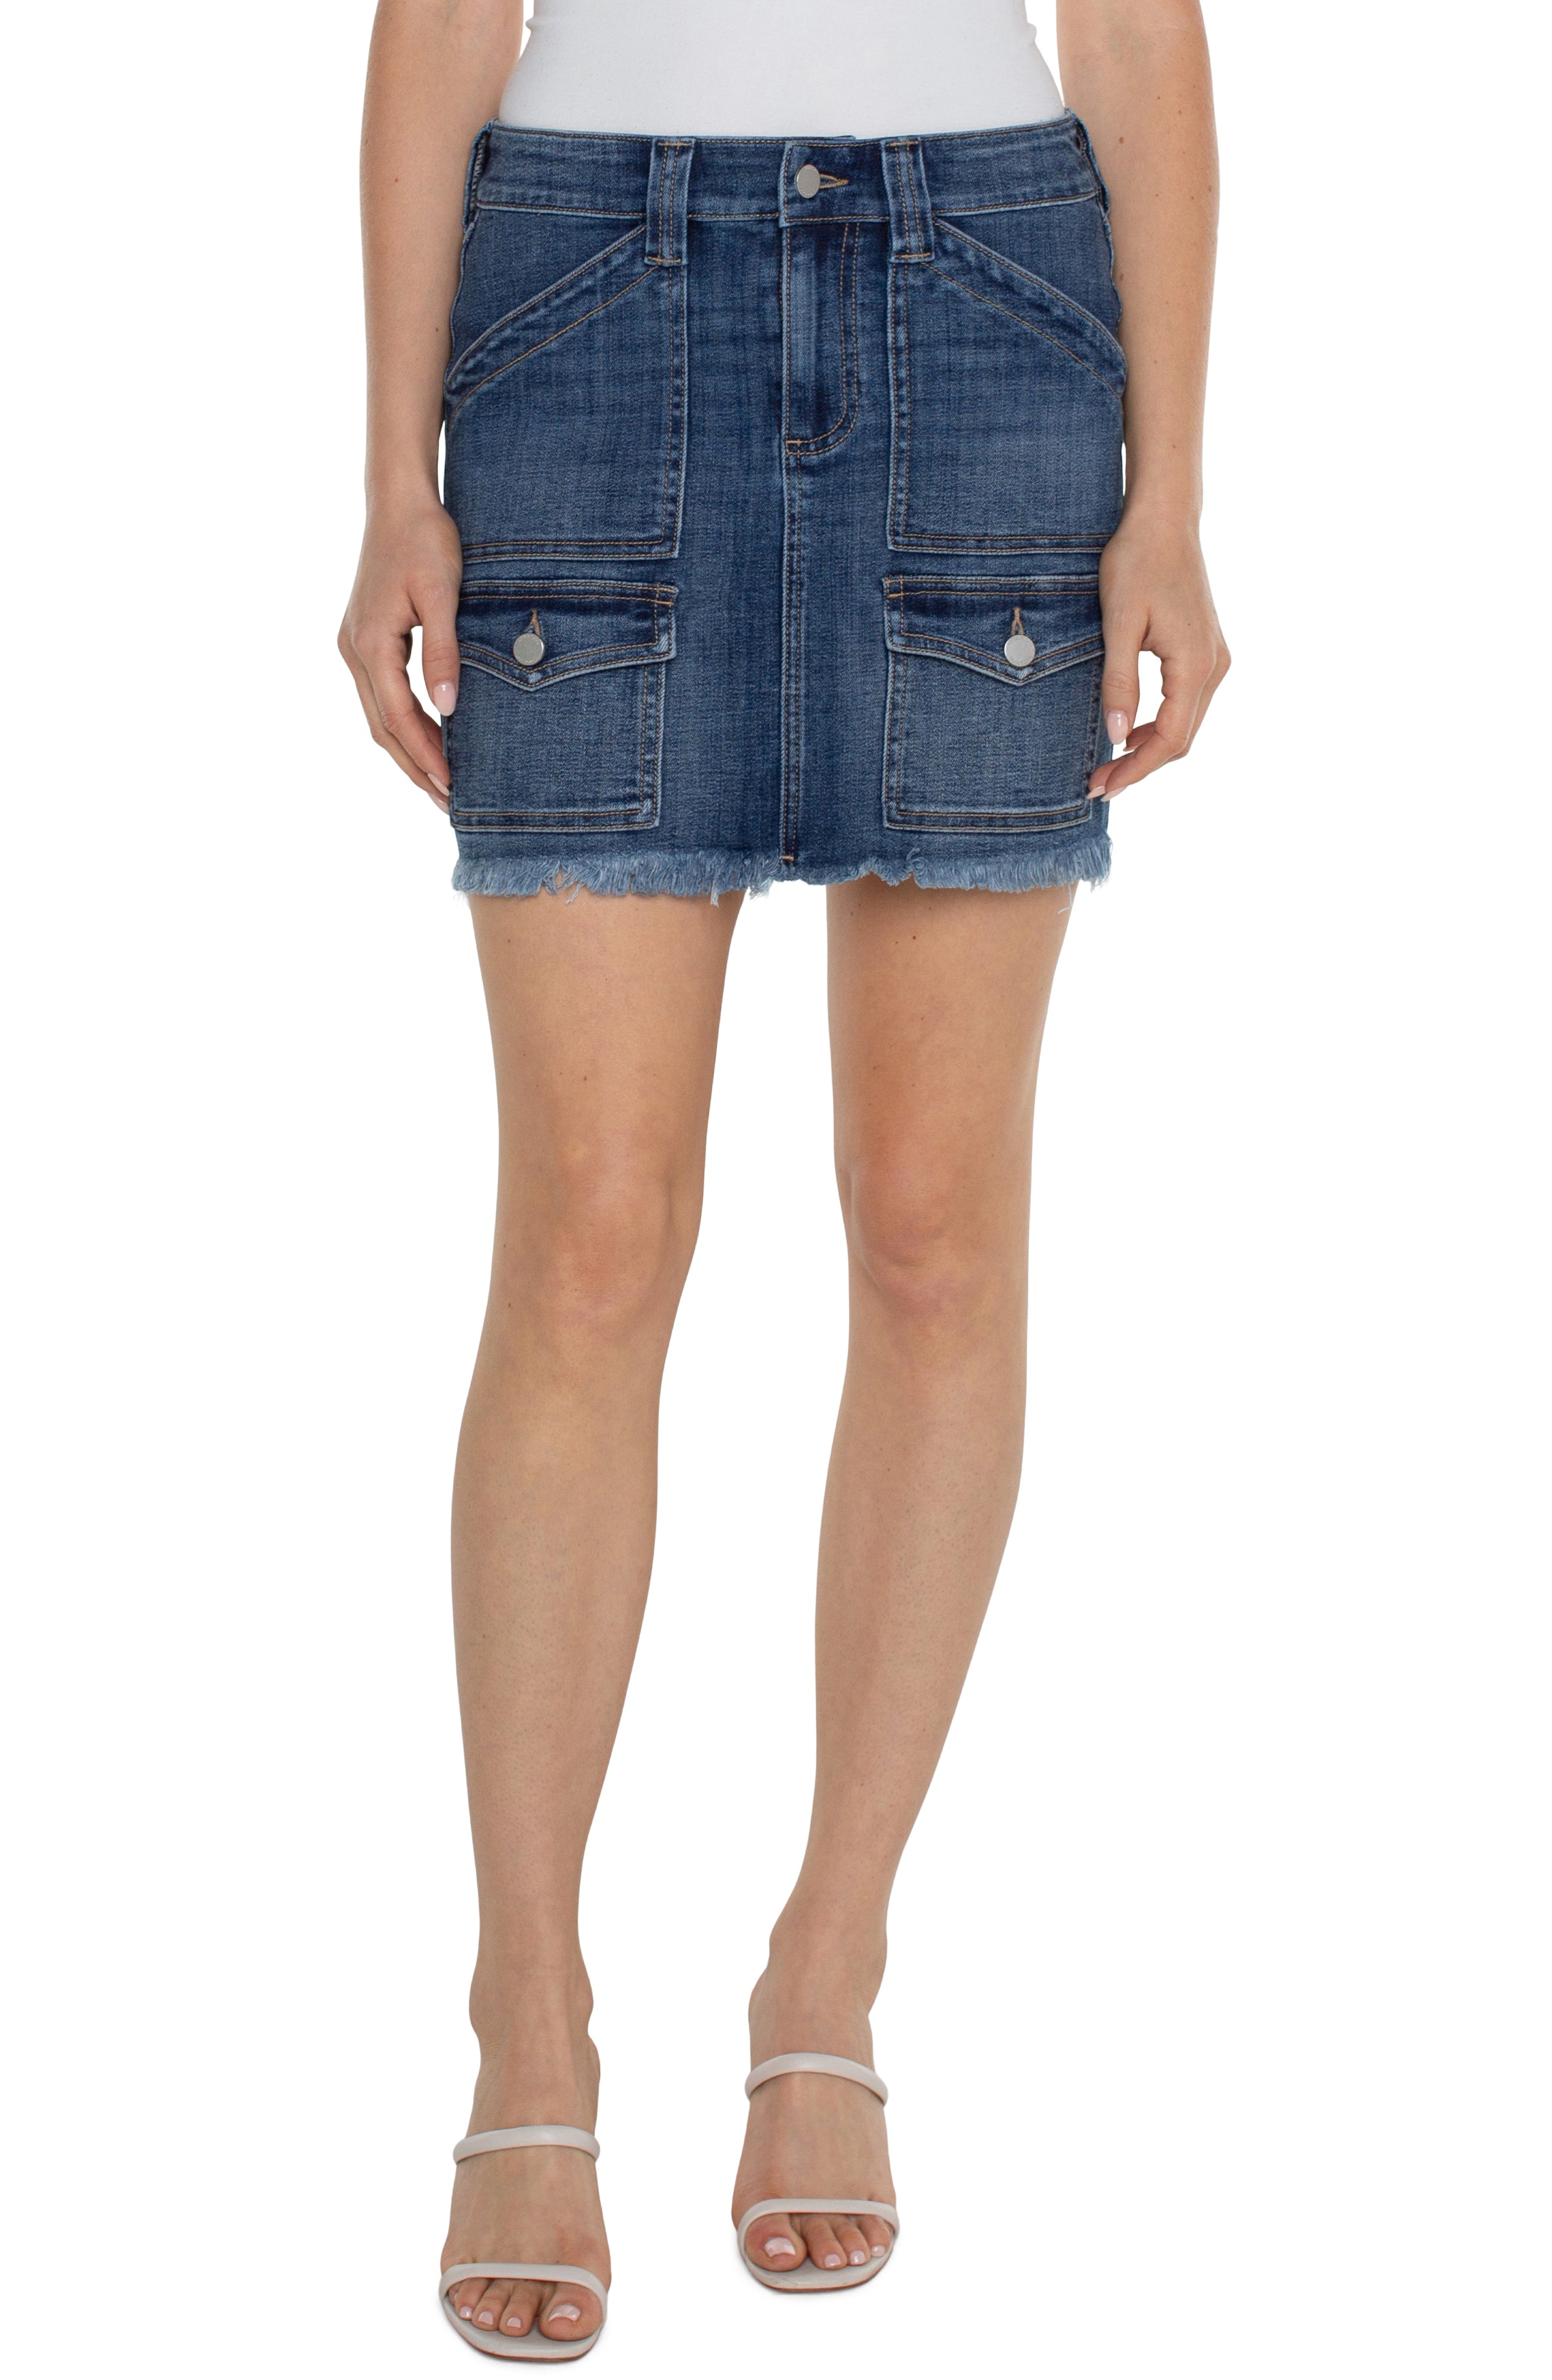 LVP Cargo Skirt - State Street Front View